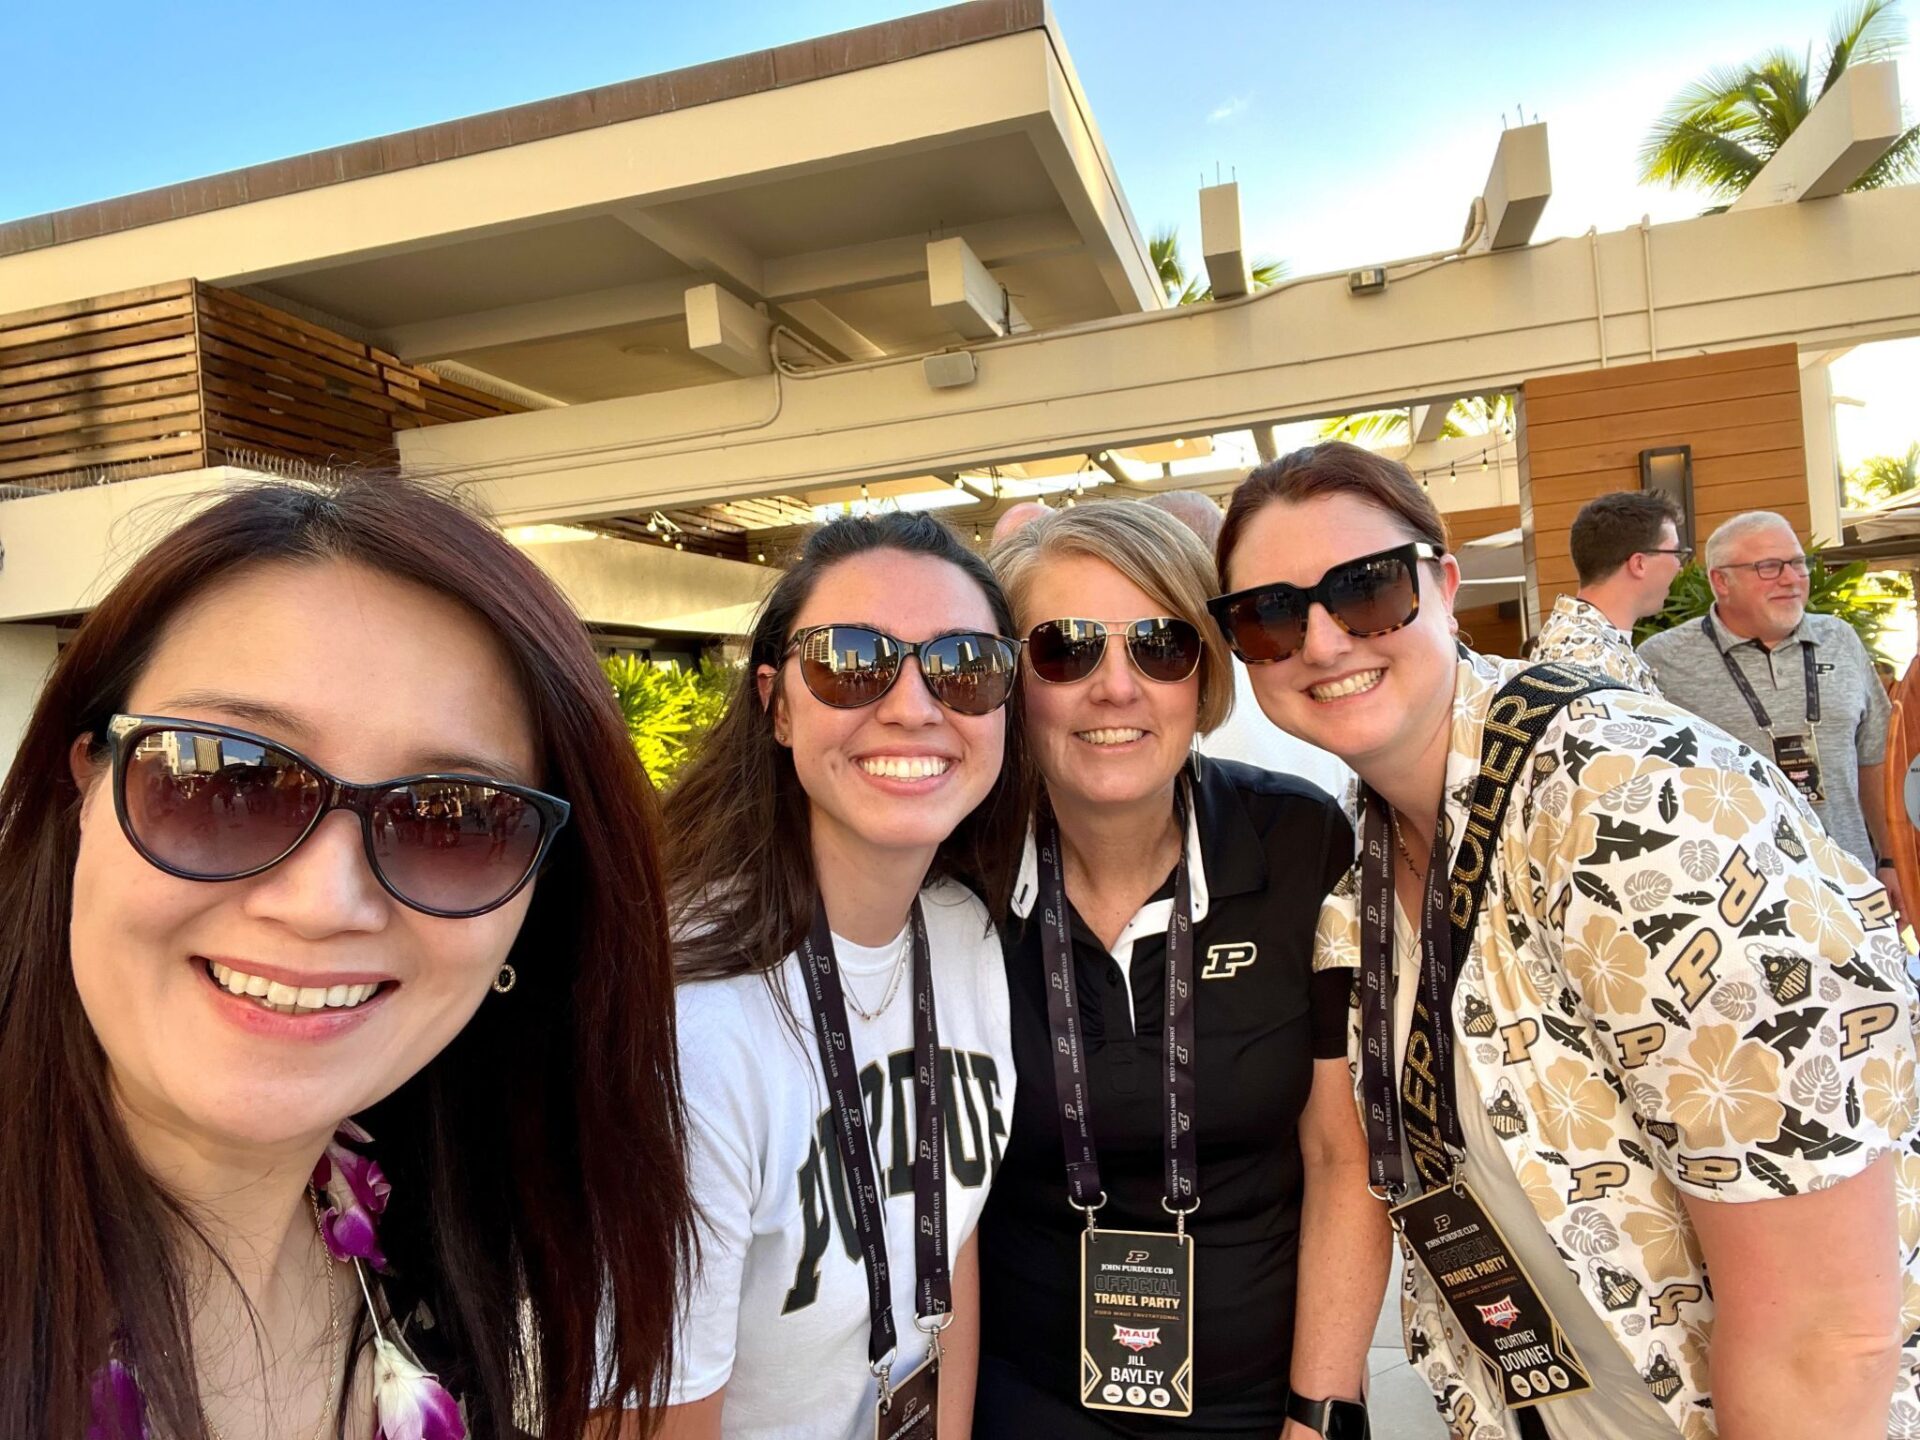 Going Above and Beyond- the Dedicated and Passionate Staff of the John Purdue Club. A Team That Makes It Happen: this staff worked tirelessly behind the scenes to ensure all details were taken care of in Hawaii! Boilermaker Spirit at its best!